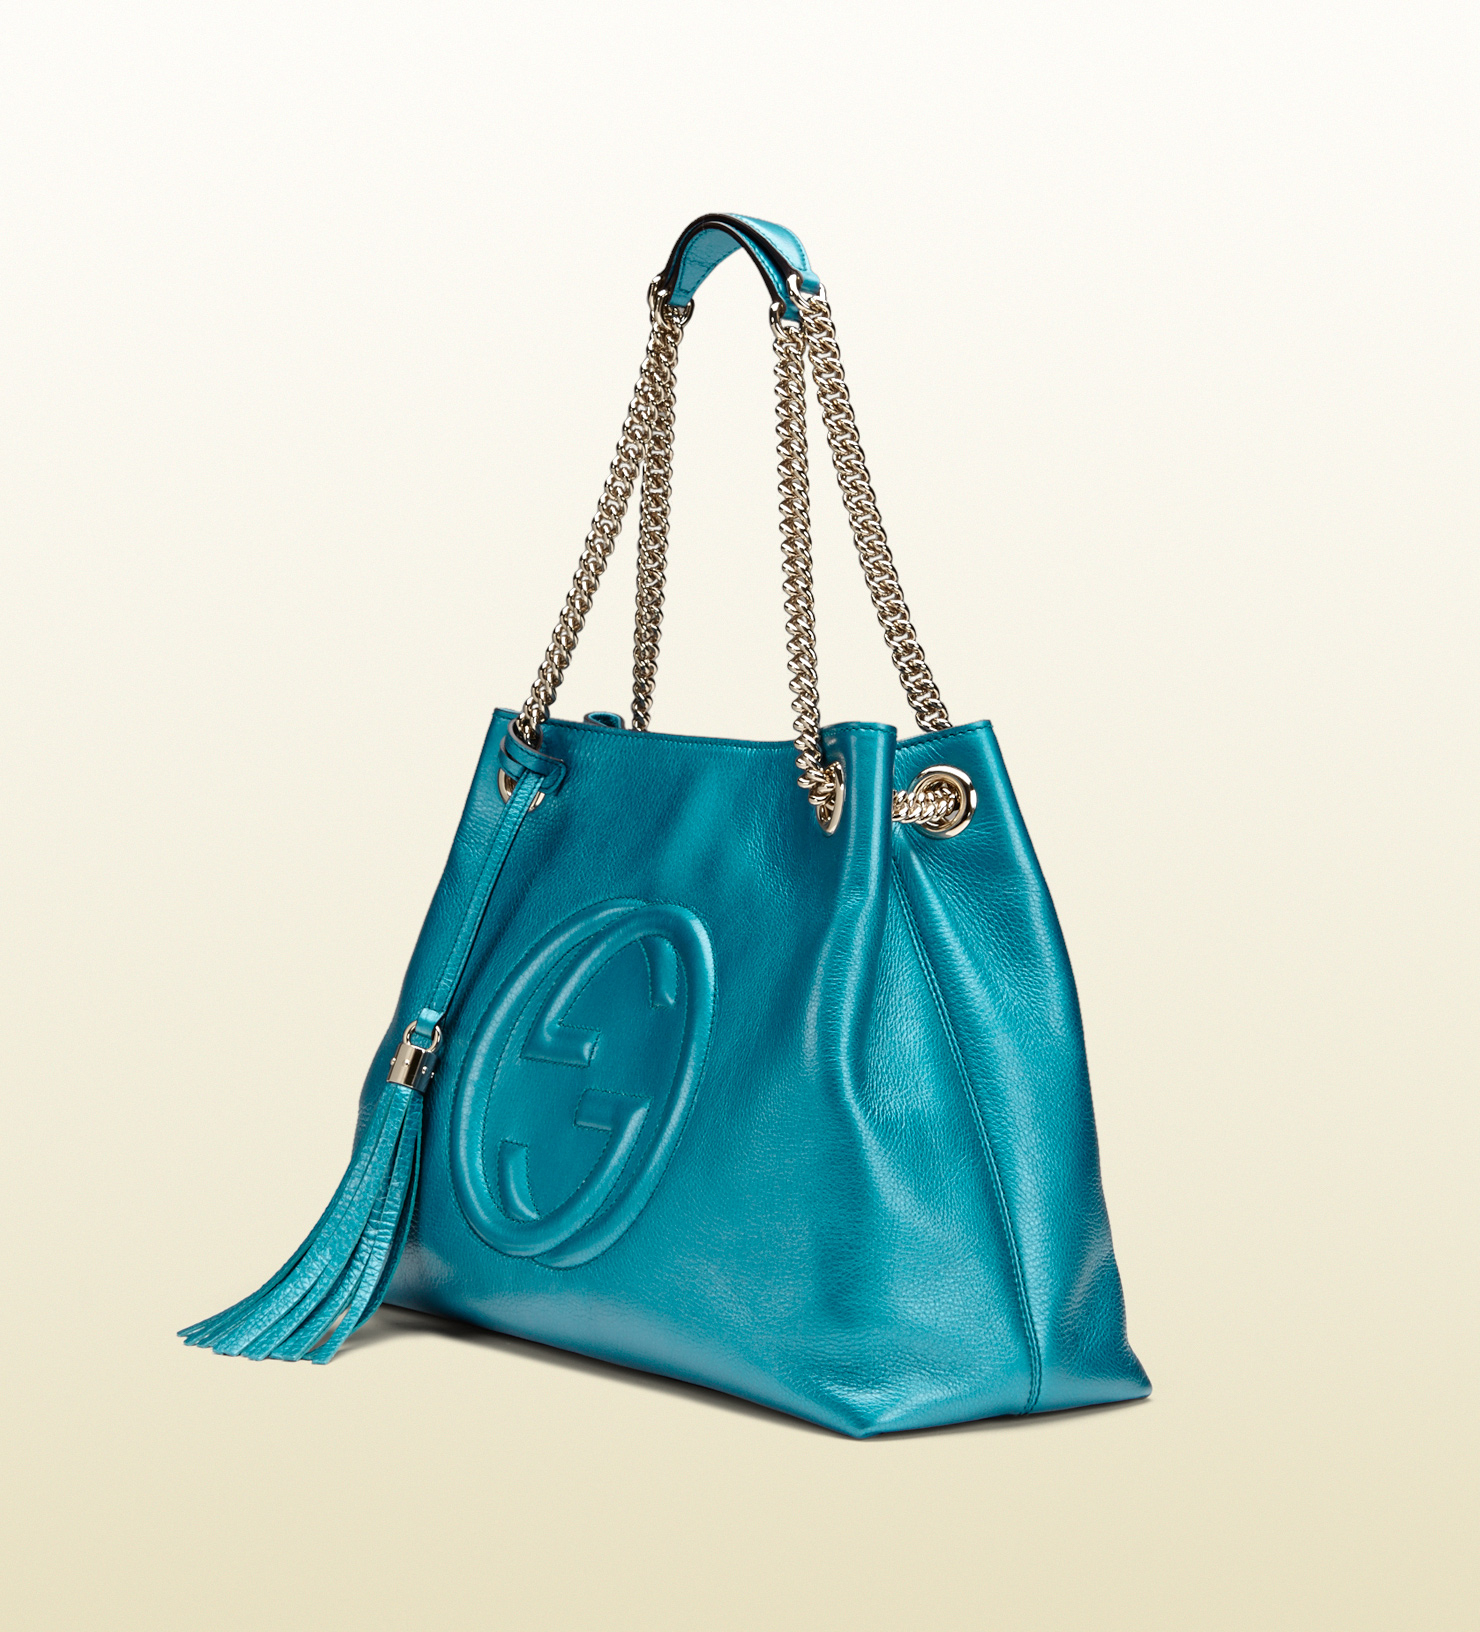 Gucci Online Exclusive Soho Metallic Leather Shoulder Bag in Teal (Blue) - Lyst